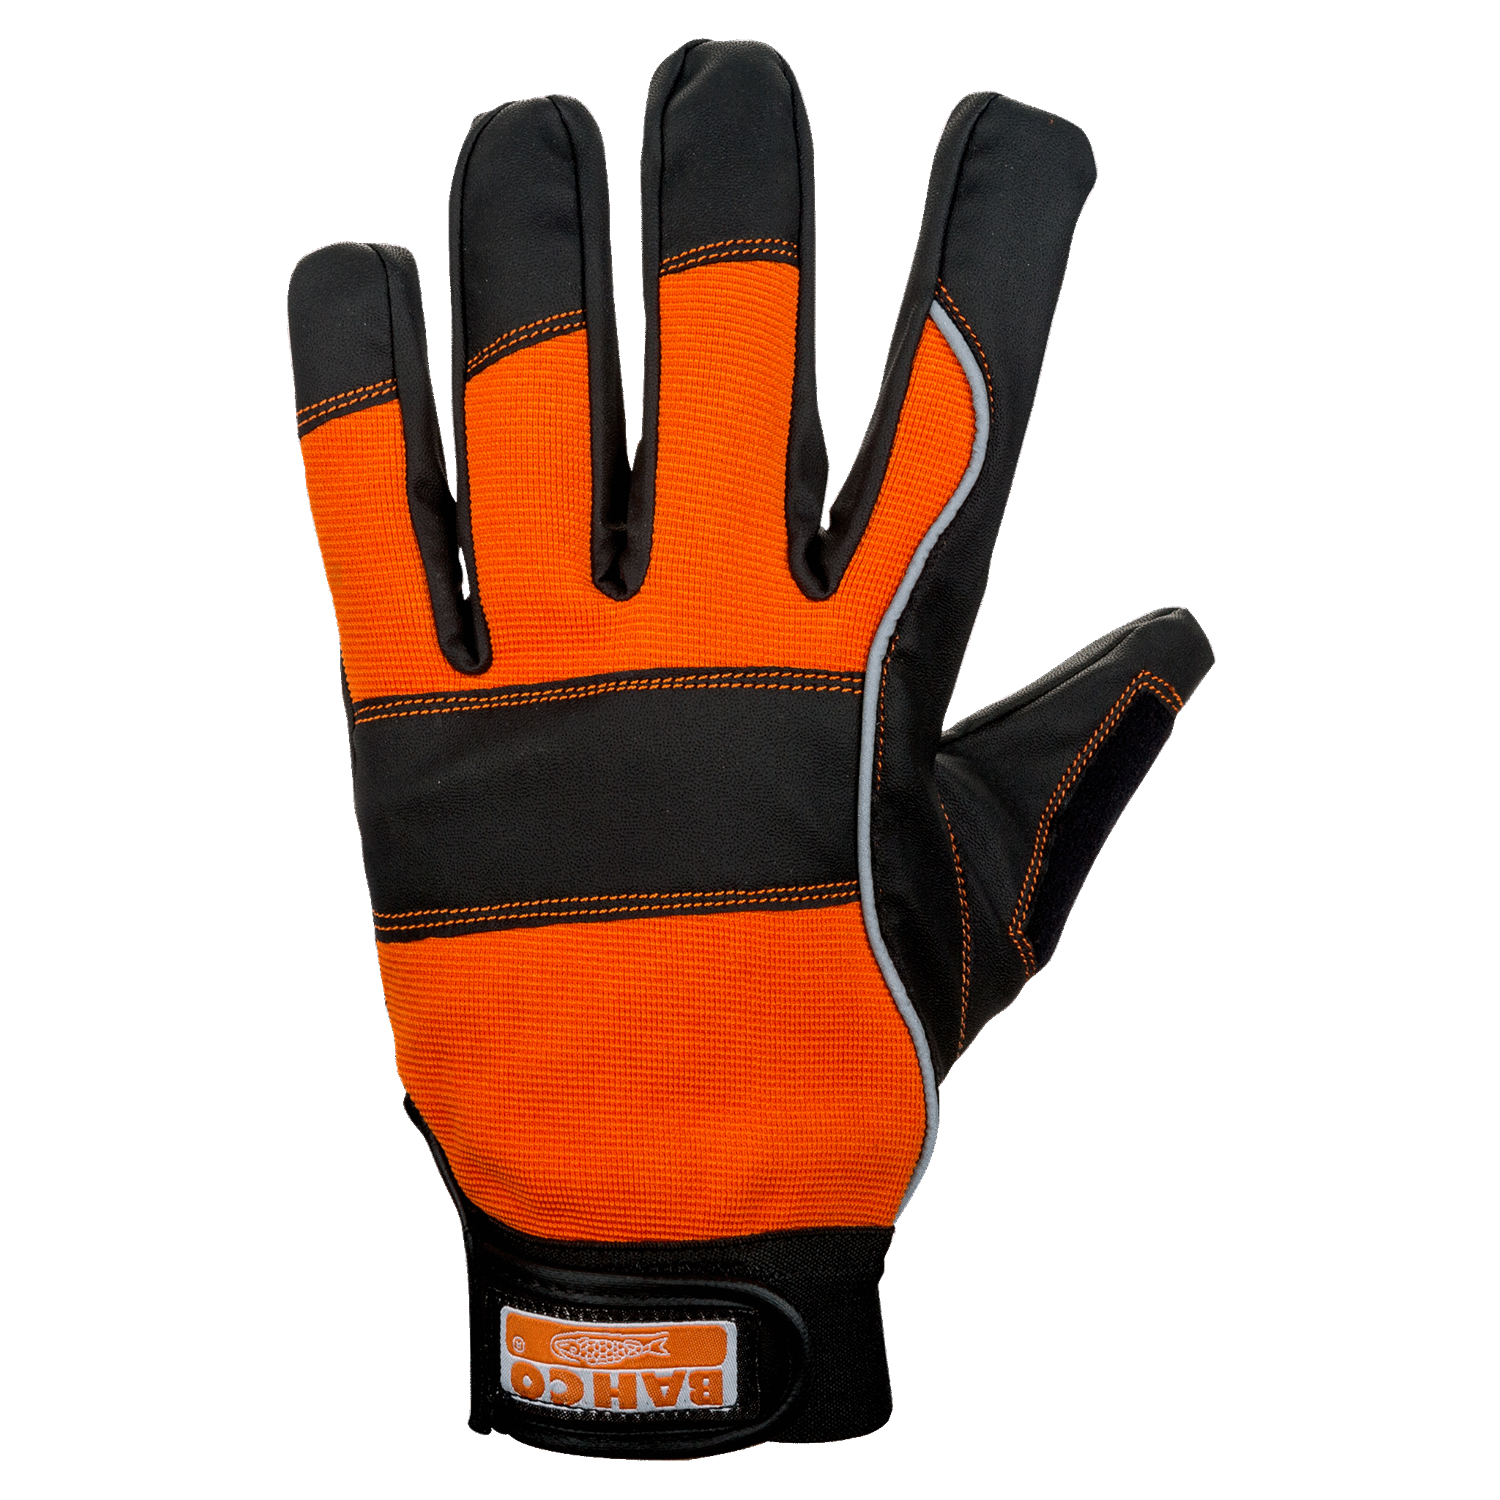 BAHCO GL008 General Purpose Gloves with Absorption Pad - Premium General Purpose Gloves from BAHCO - Shop now at Yew Aik.